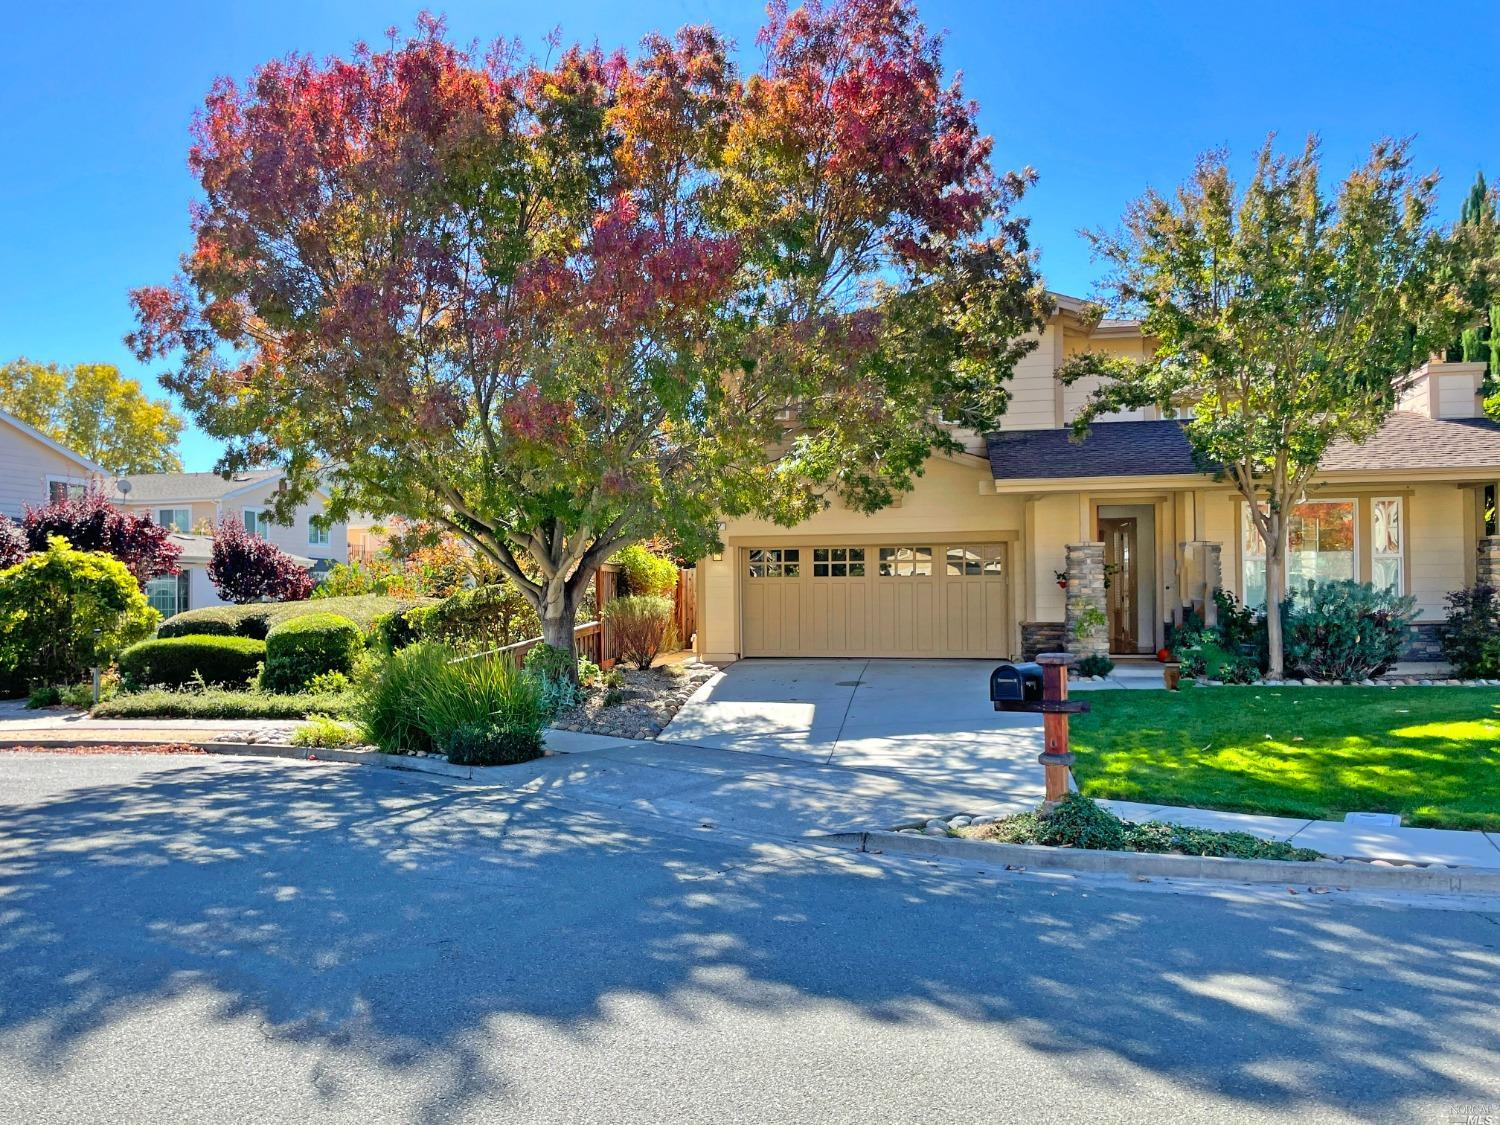 Opportunity time! Buy while the buying is good before the busy spring market. Previously valued at $1.8 mil in April, now priced to sell at $50k below Zillow value. LOCATION is terrific, rare lot  with only one neighbor, cul de sac with no thru traffic. One of the most popular floorplans in all of Pointe Marin, nearly 3,000 sq ft with 1 br and 1 full ba on the main level, PLUS 4 bedrooms grouped together on the top floor. Large primary suite overlooks the hills of Ignacio. Long list of seller improvements include new paint inside and out, new bamboo floors upstairs and down, Wolf range & convection oven, granite counters, new A/C condenser, whole house WATER PURIFIER for delicious water from all faucets, warm spa under your own gazebo, custom fireplace inserts, your own professional PIZZA oven and so much more. Kitchen/family room combo has tall south facing windows and slider, opening to one of 2 nice stone patios for outdoor enjoyment or entertaining. Garage is big enough for 2 cars AND a workshop or golf cart. The weather is so great here, you'll be outside all the time. Close to parks, Pacheco Plaza, Marin Country Club, hiking, biking and commute. Don't wait!